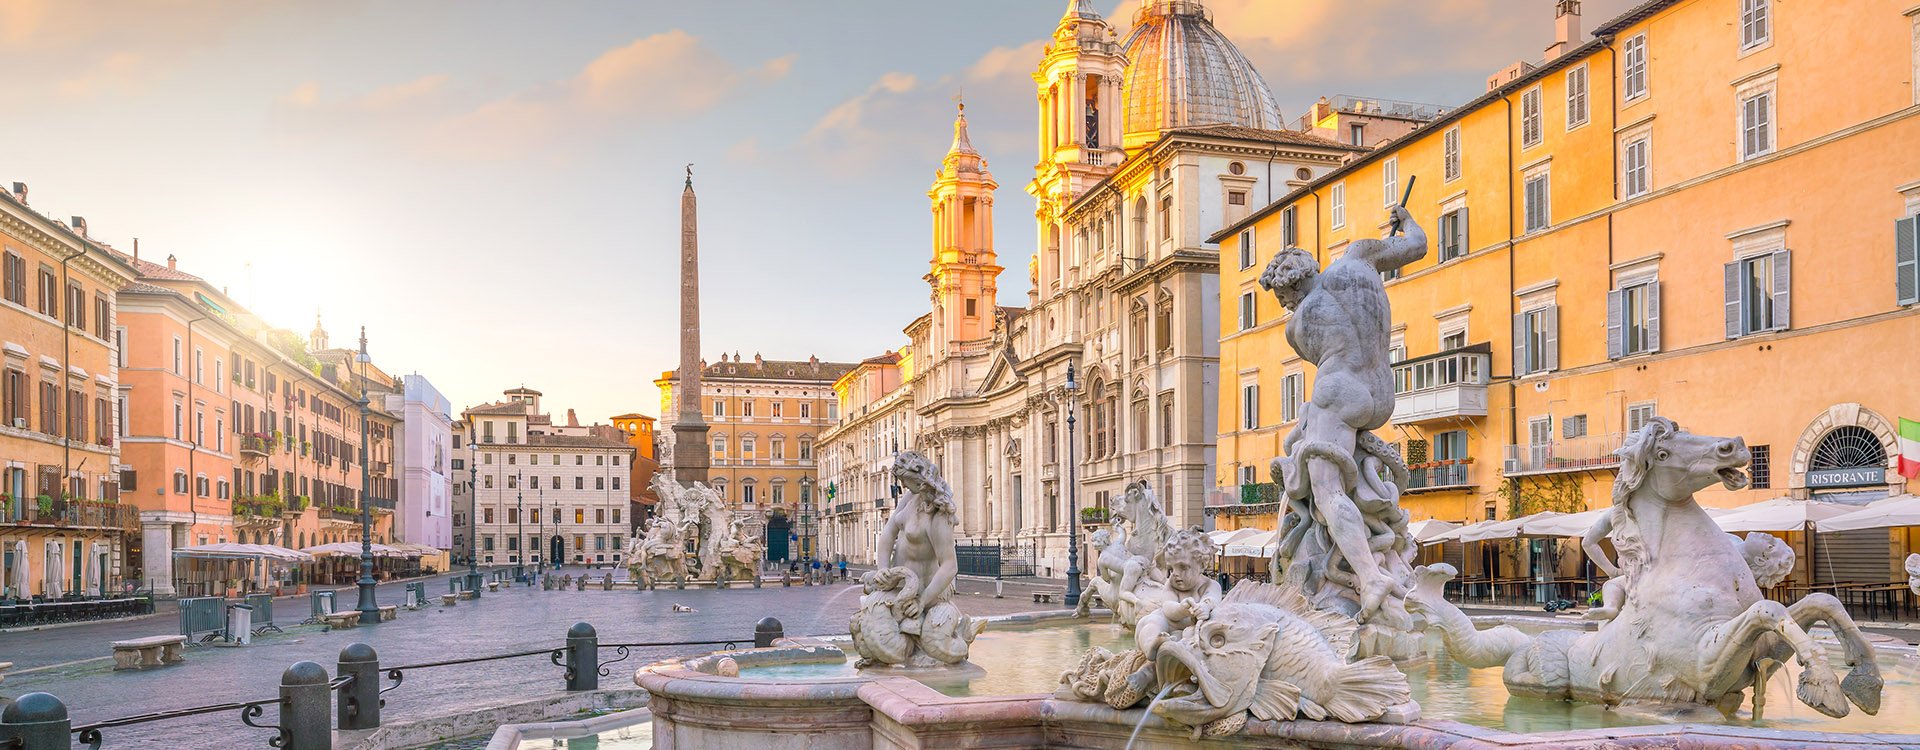 Piazza Navona in Rome, Italy at twilight